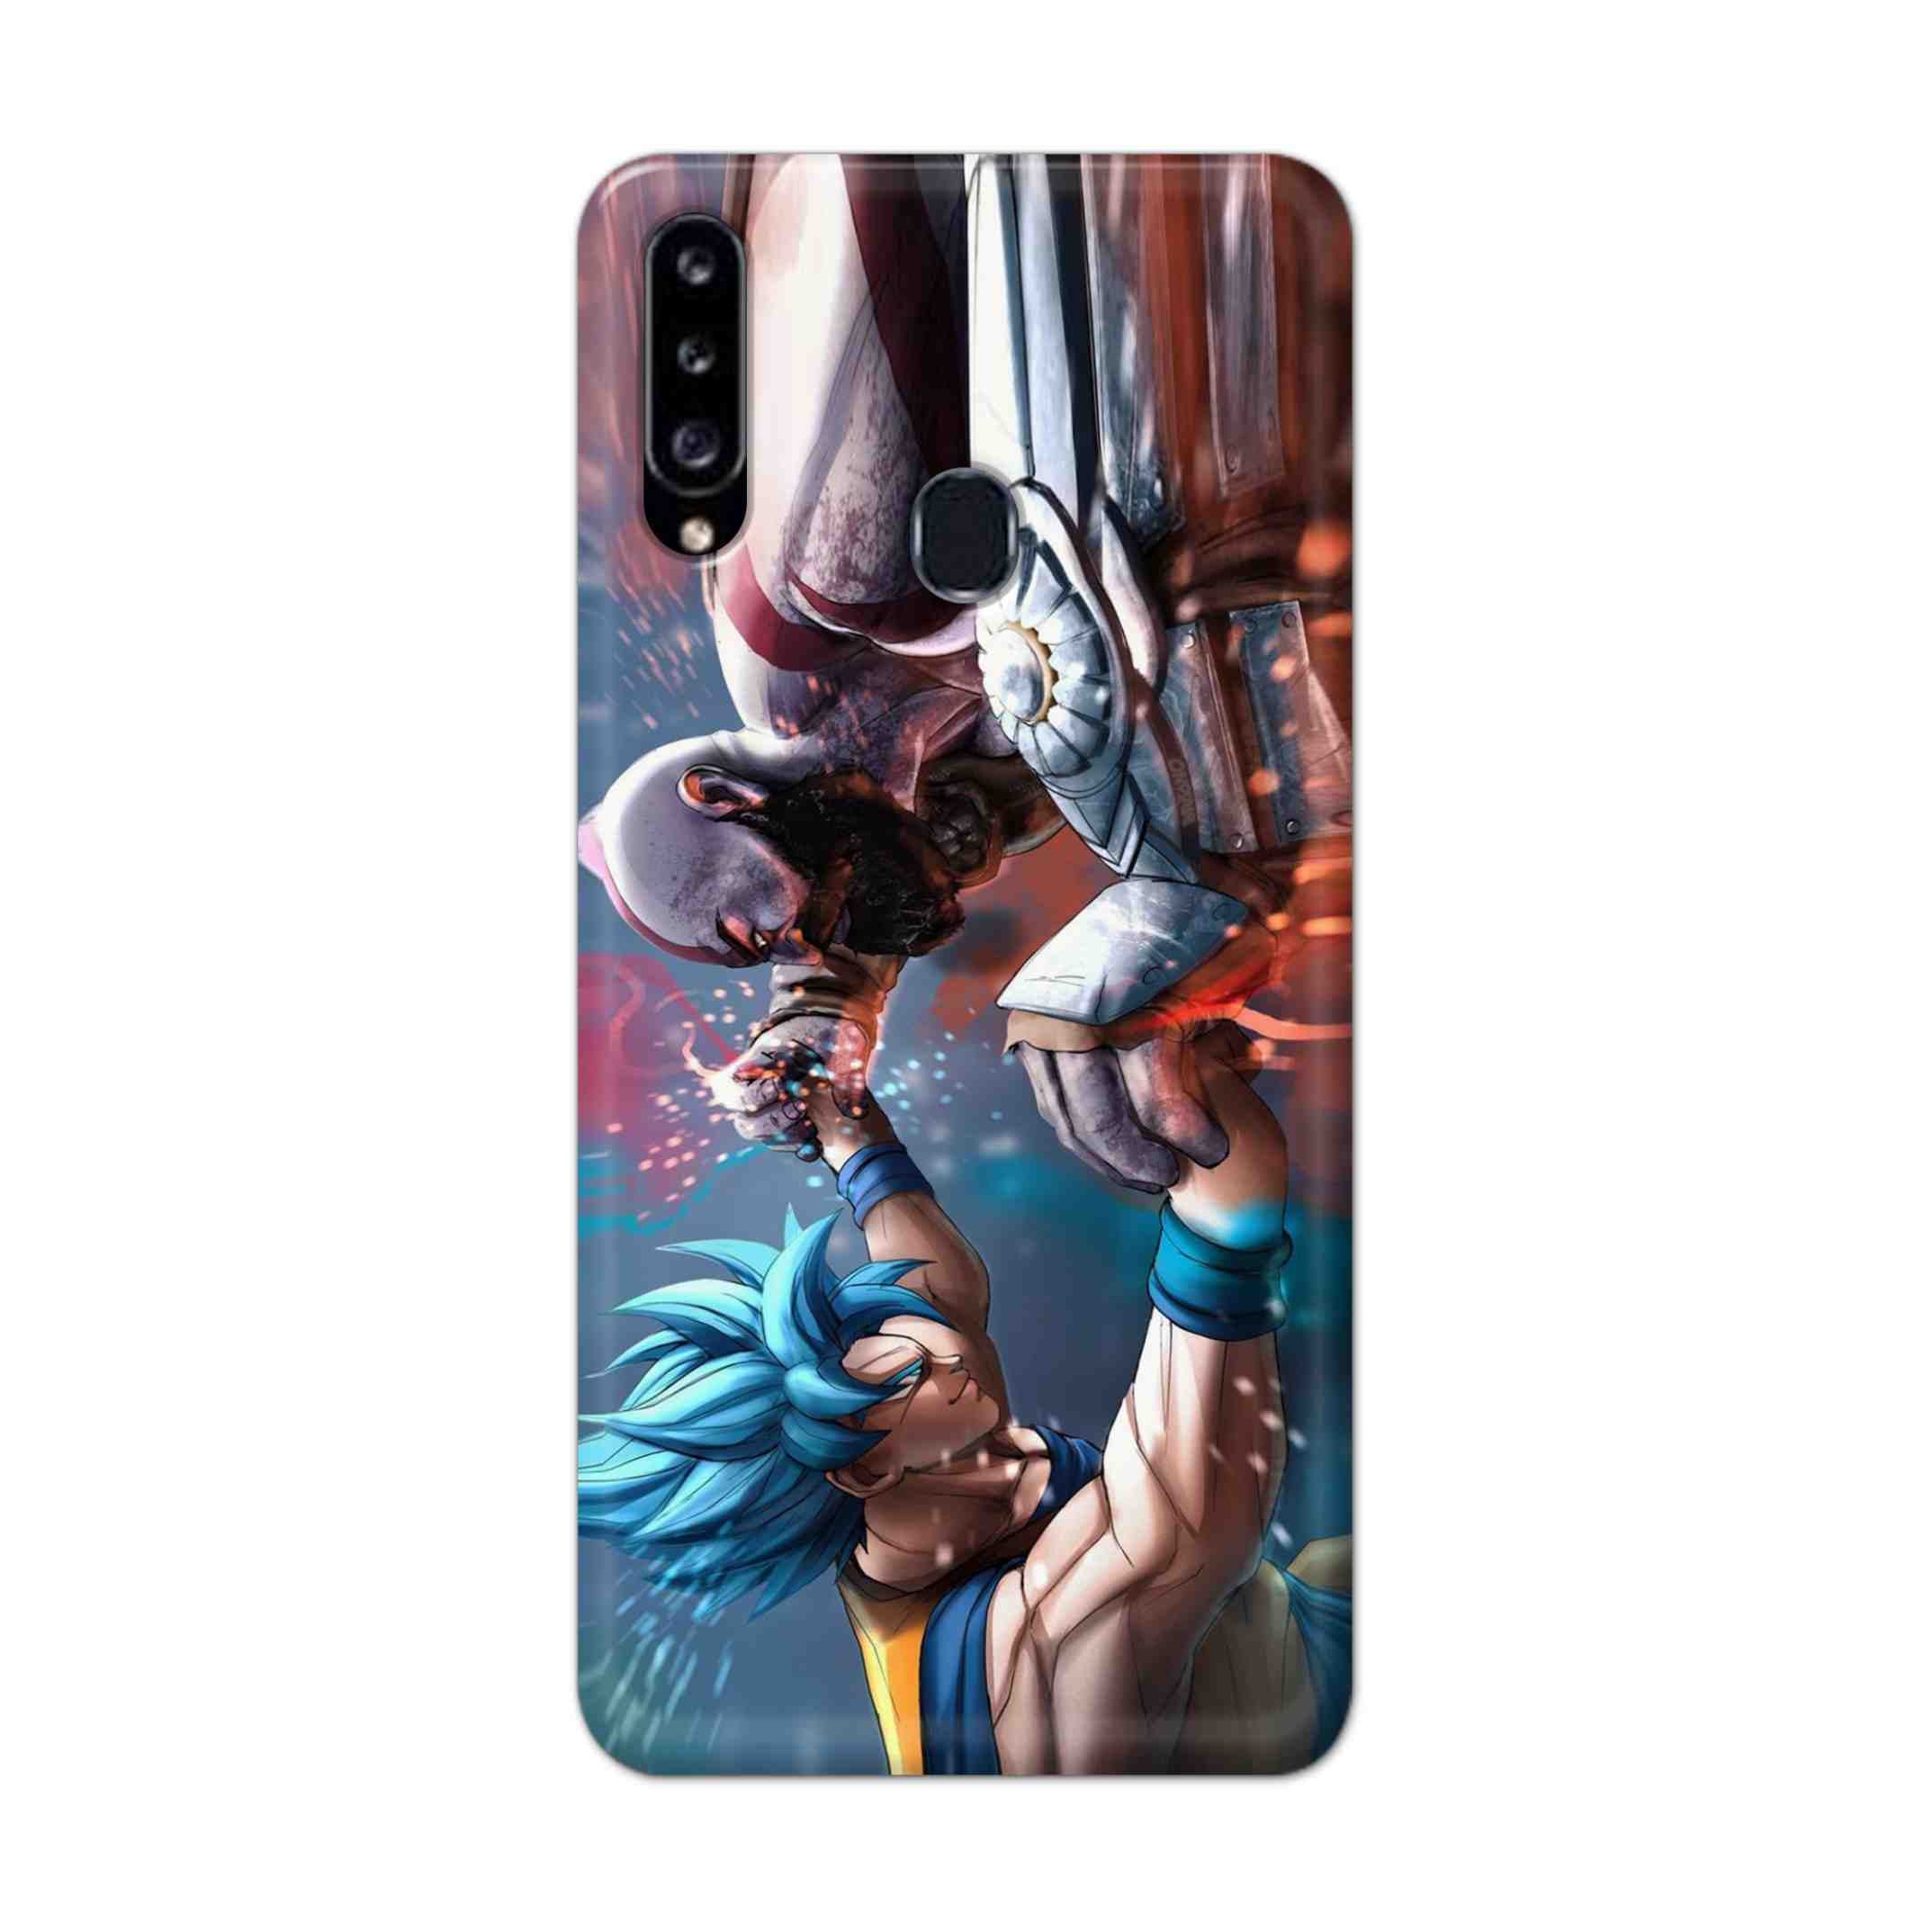 Buy Goku Vs Kratos Hard Back Mobile Phone Case Cover For Samsung Galaxy A21 Online